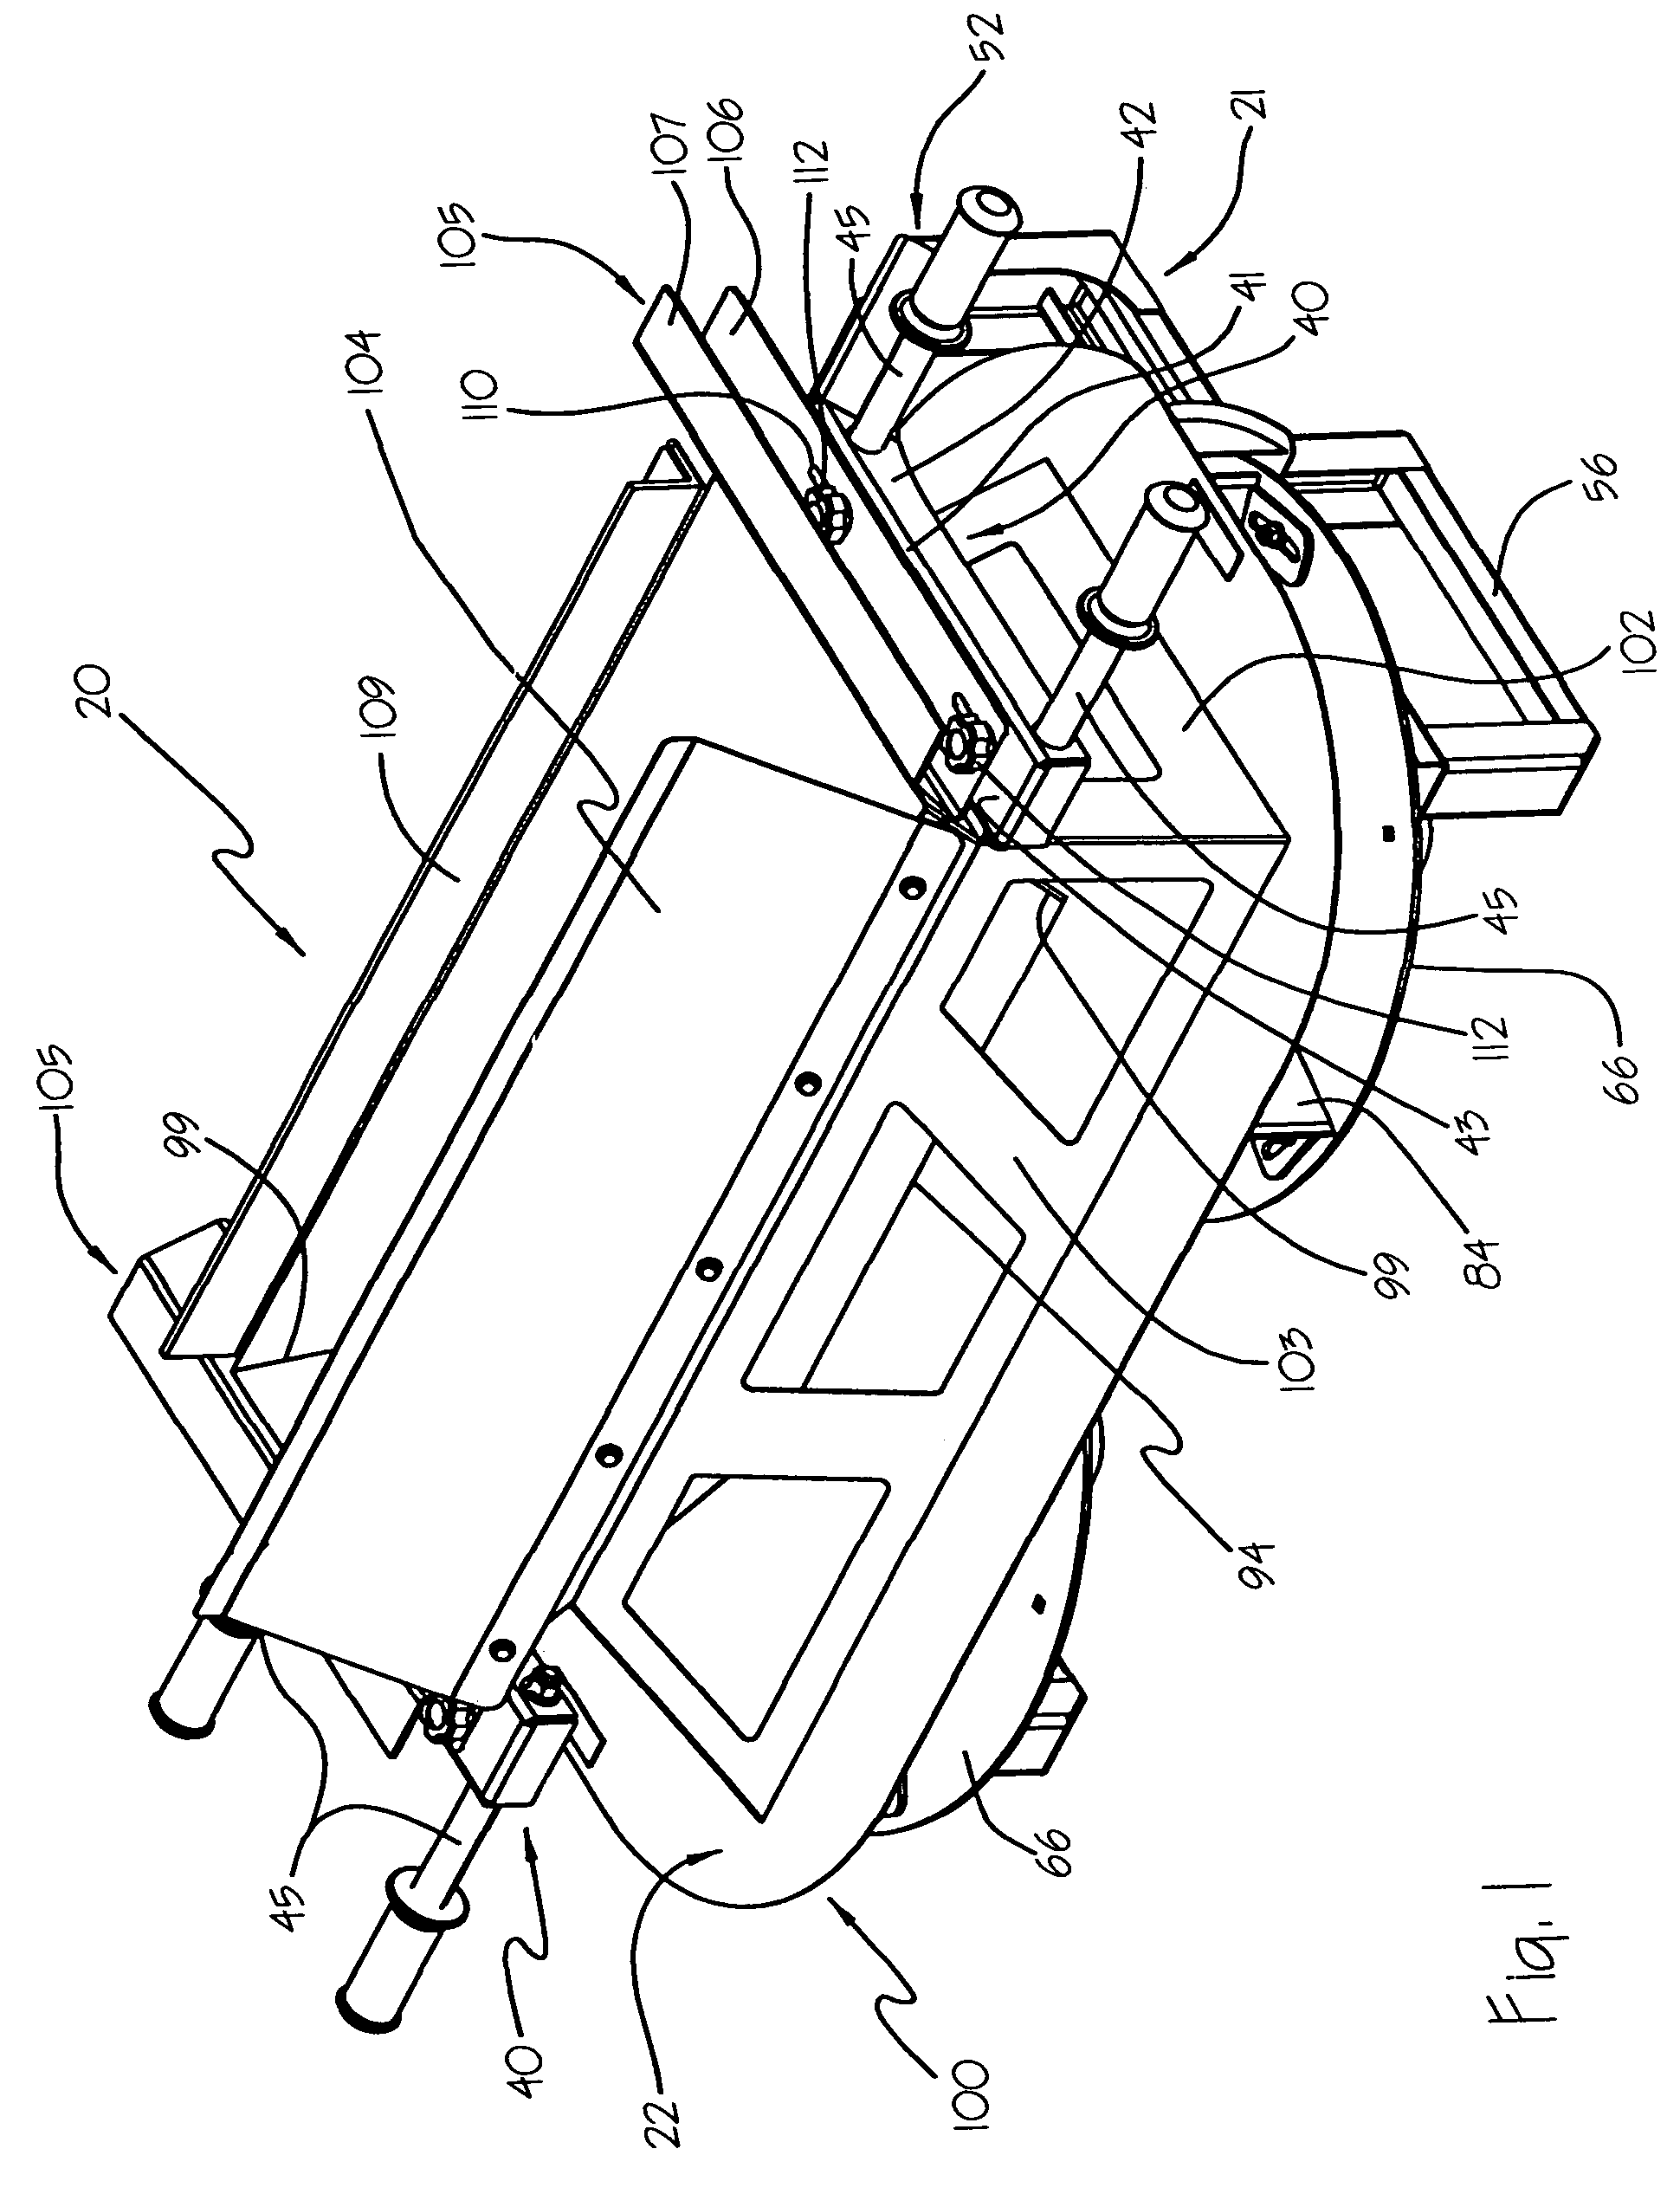 Twin spinner spreading apparatus